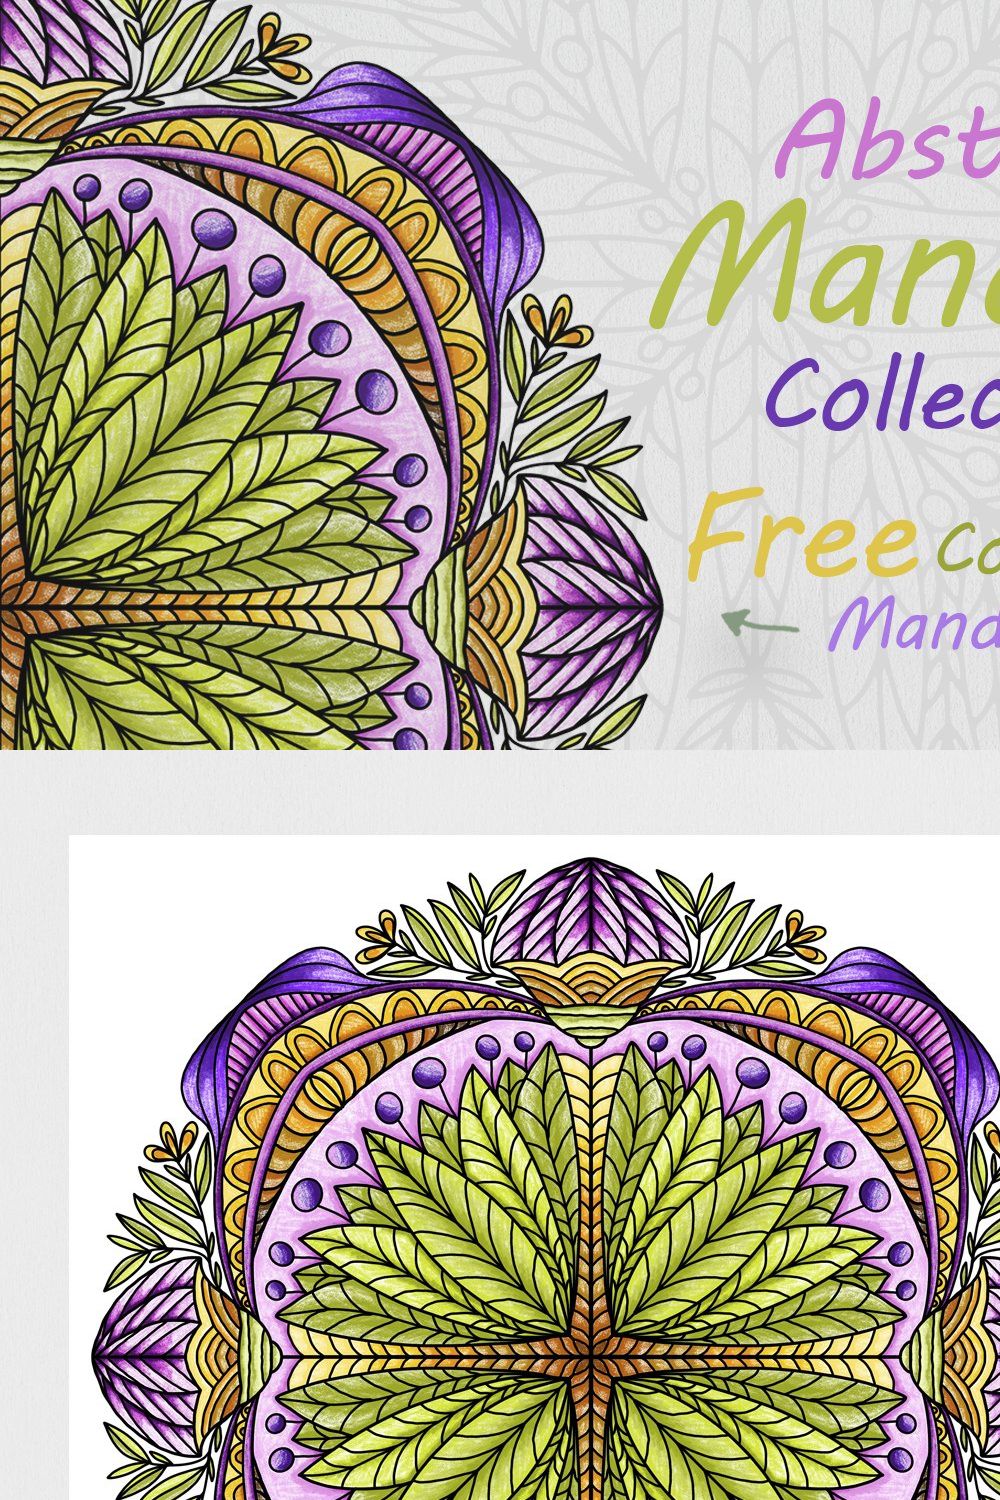 Collection of hand drawn mandalas pinterest preview image.